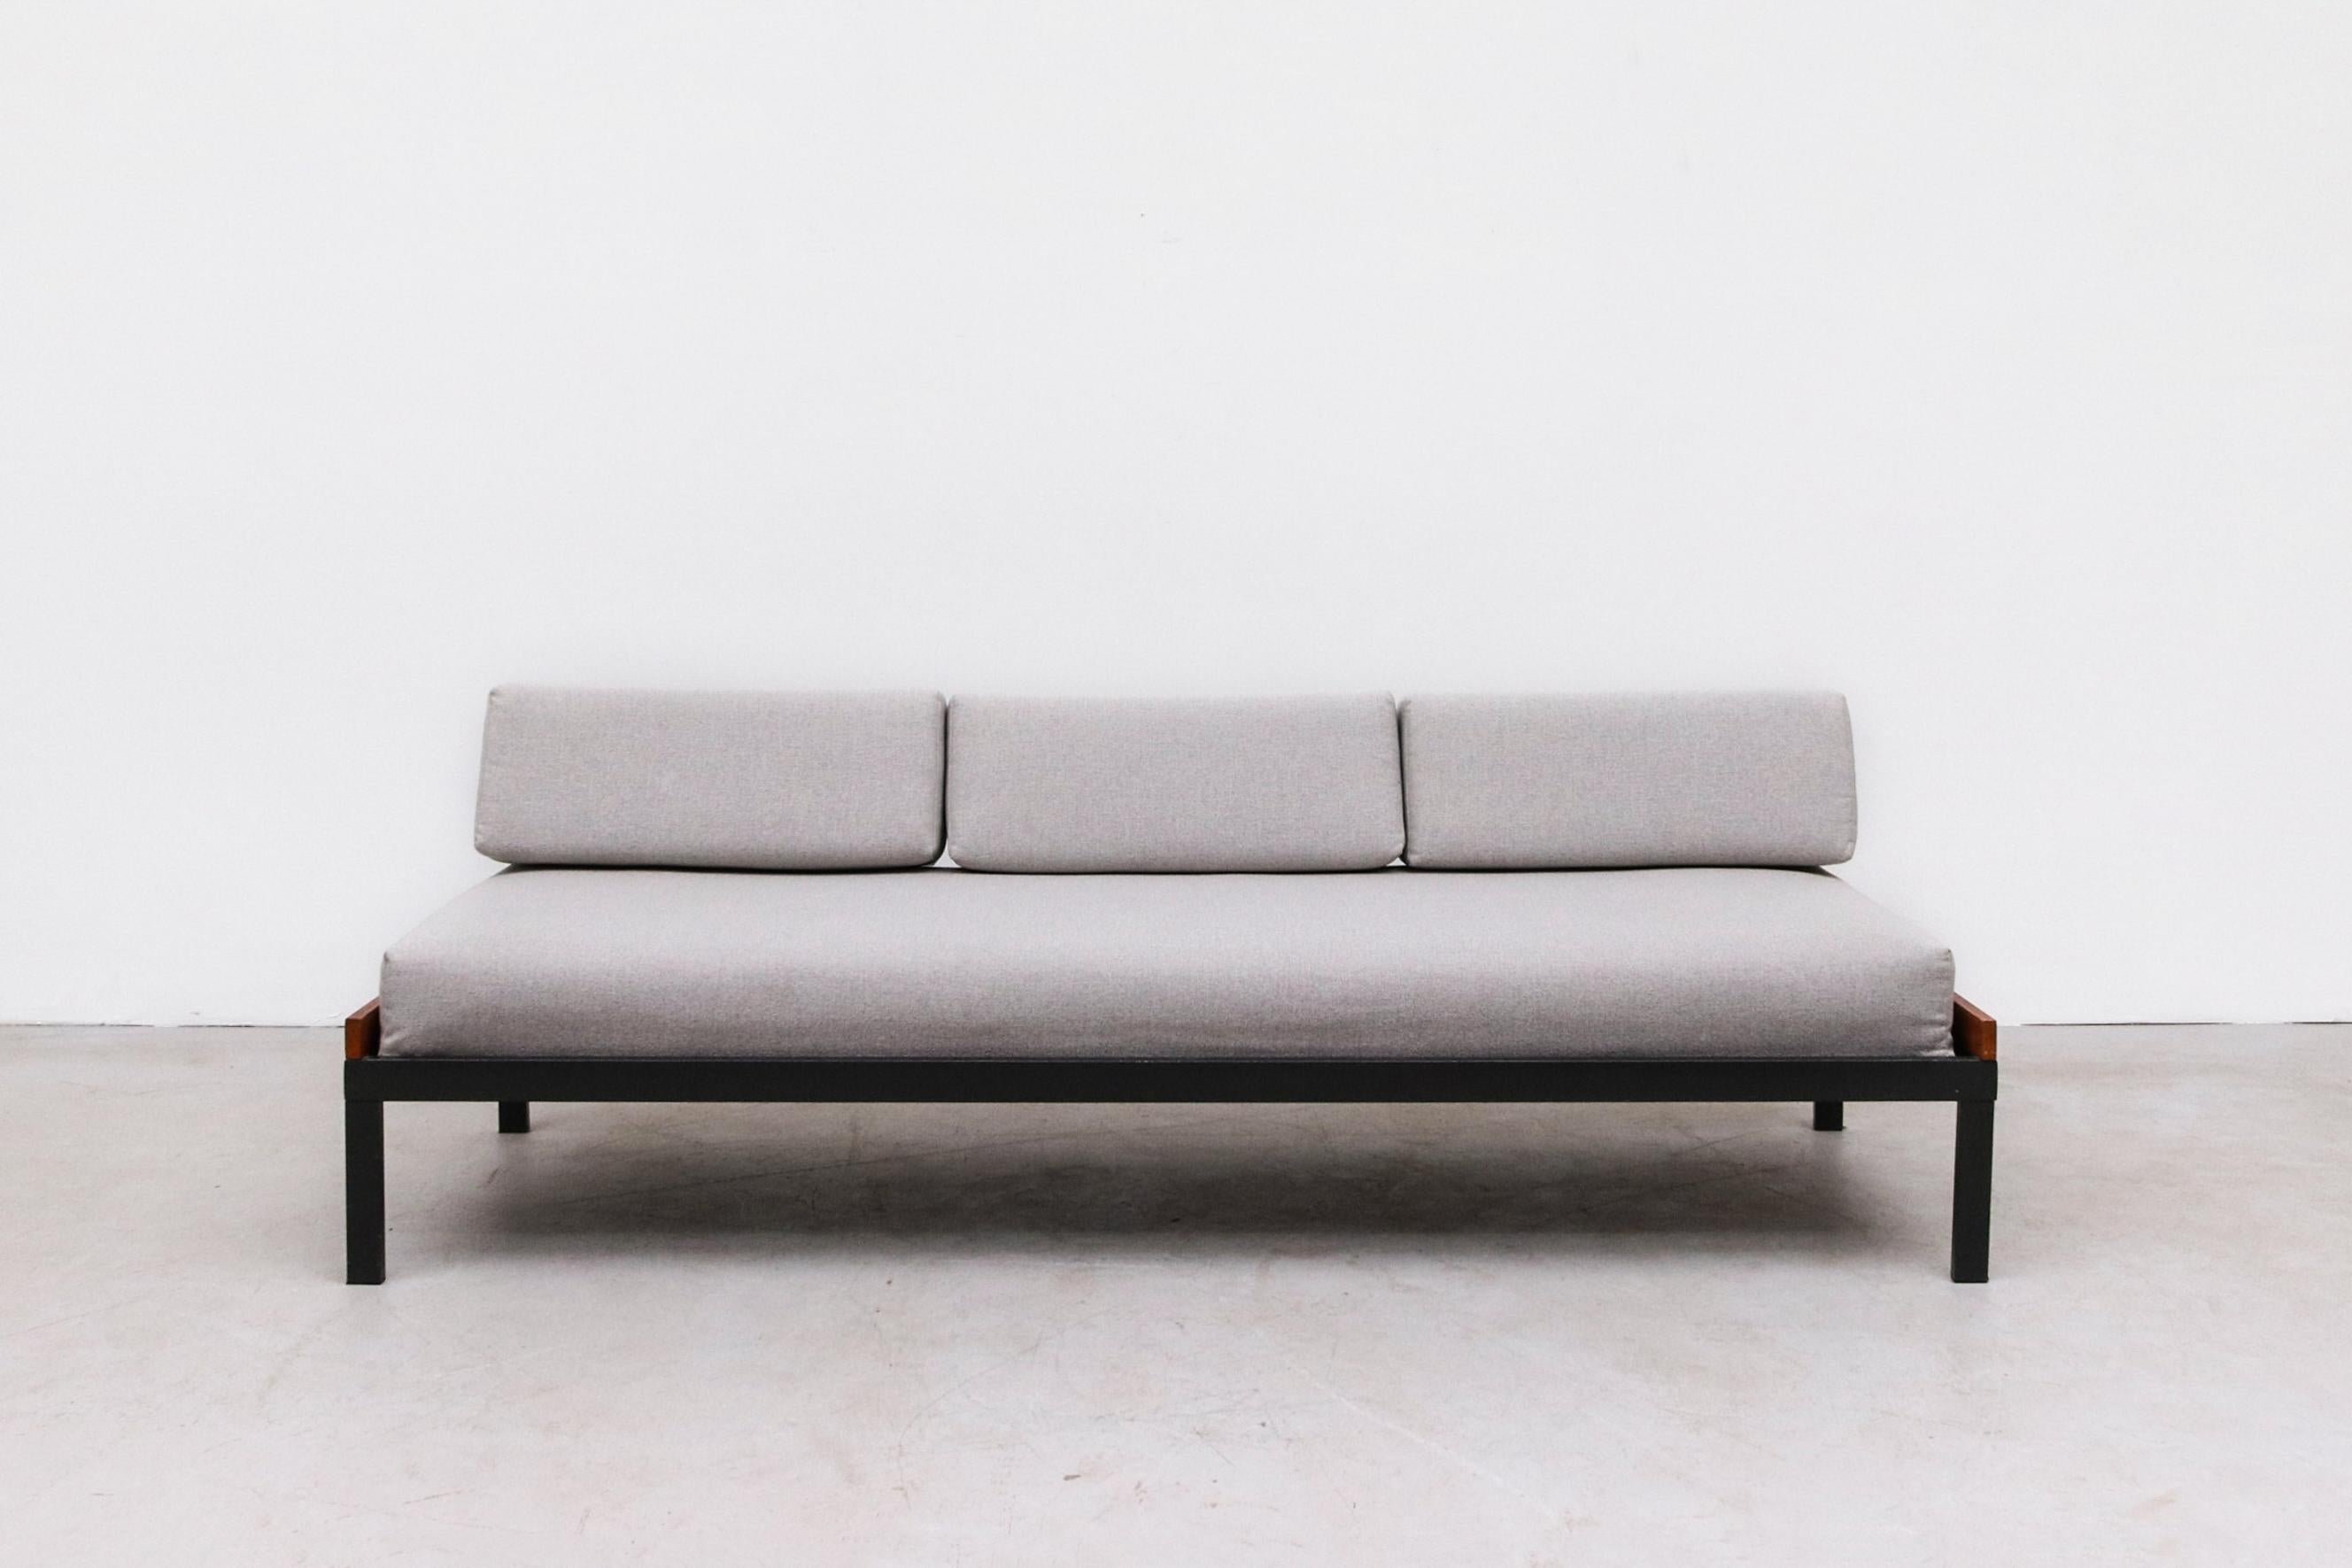 Friso Kramer 'Couchette' daybed for Auping, 1965. Frame is original condition, mattress and cushions newly upholstered. Frame has visible wear, consistent with its age and use. Frame height is 10.5